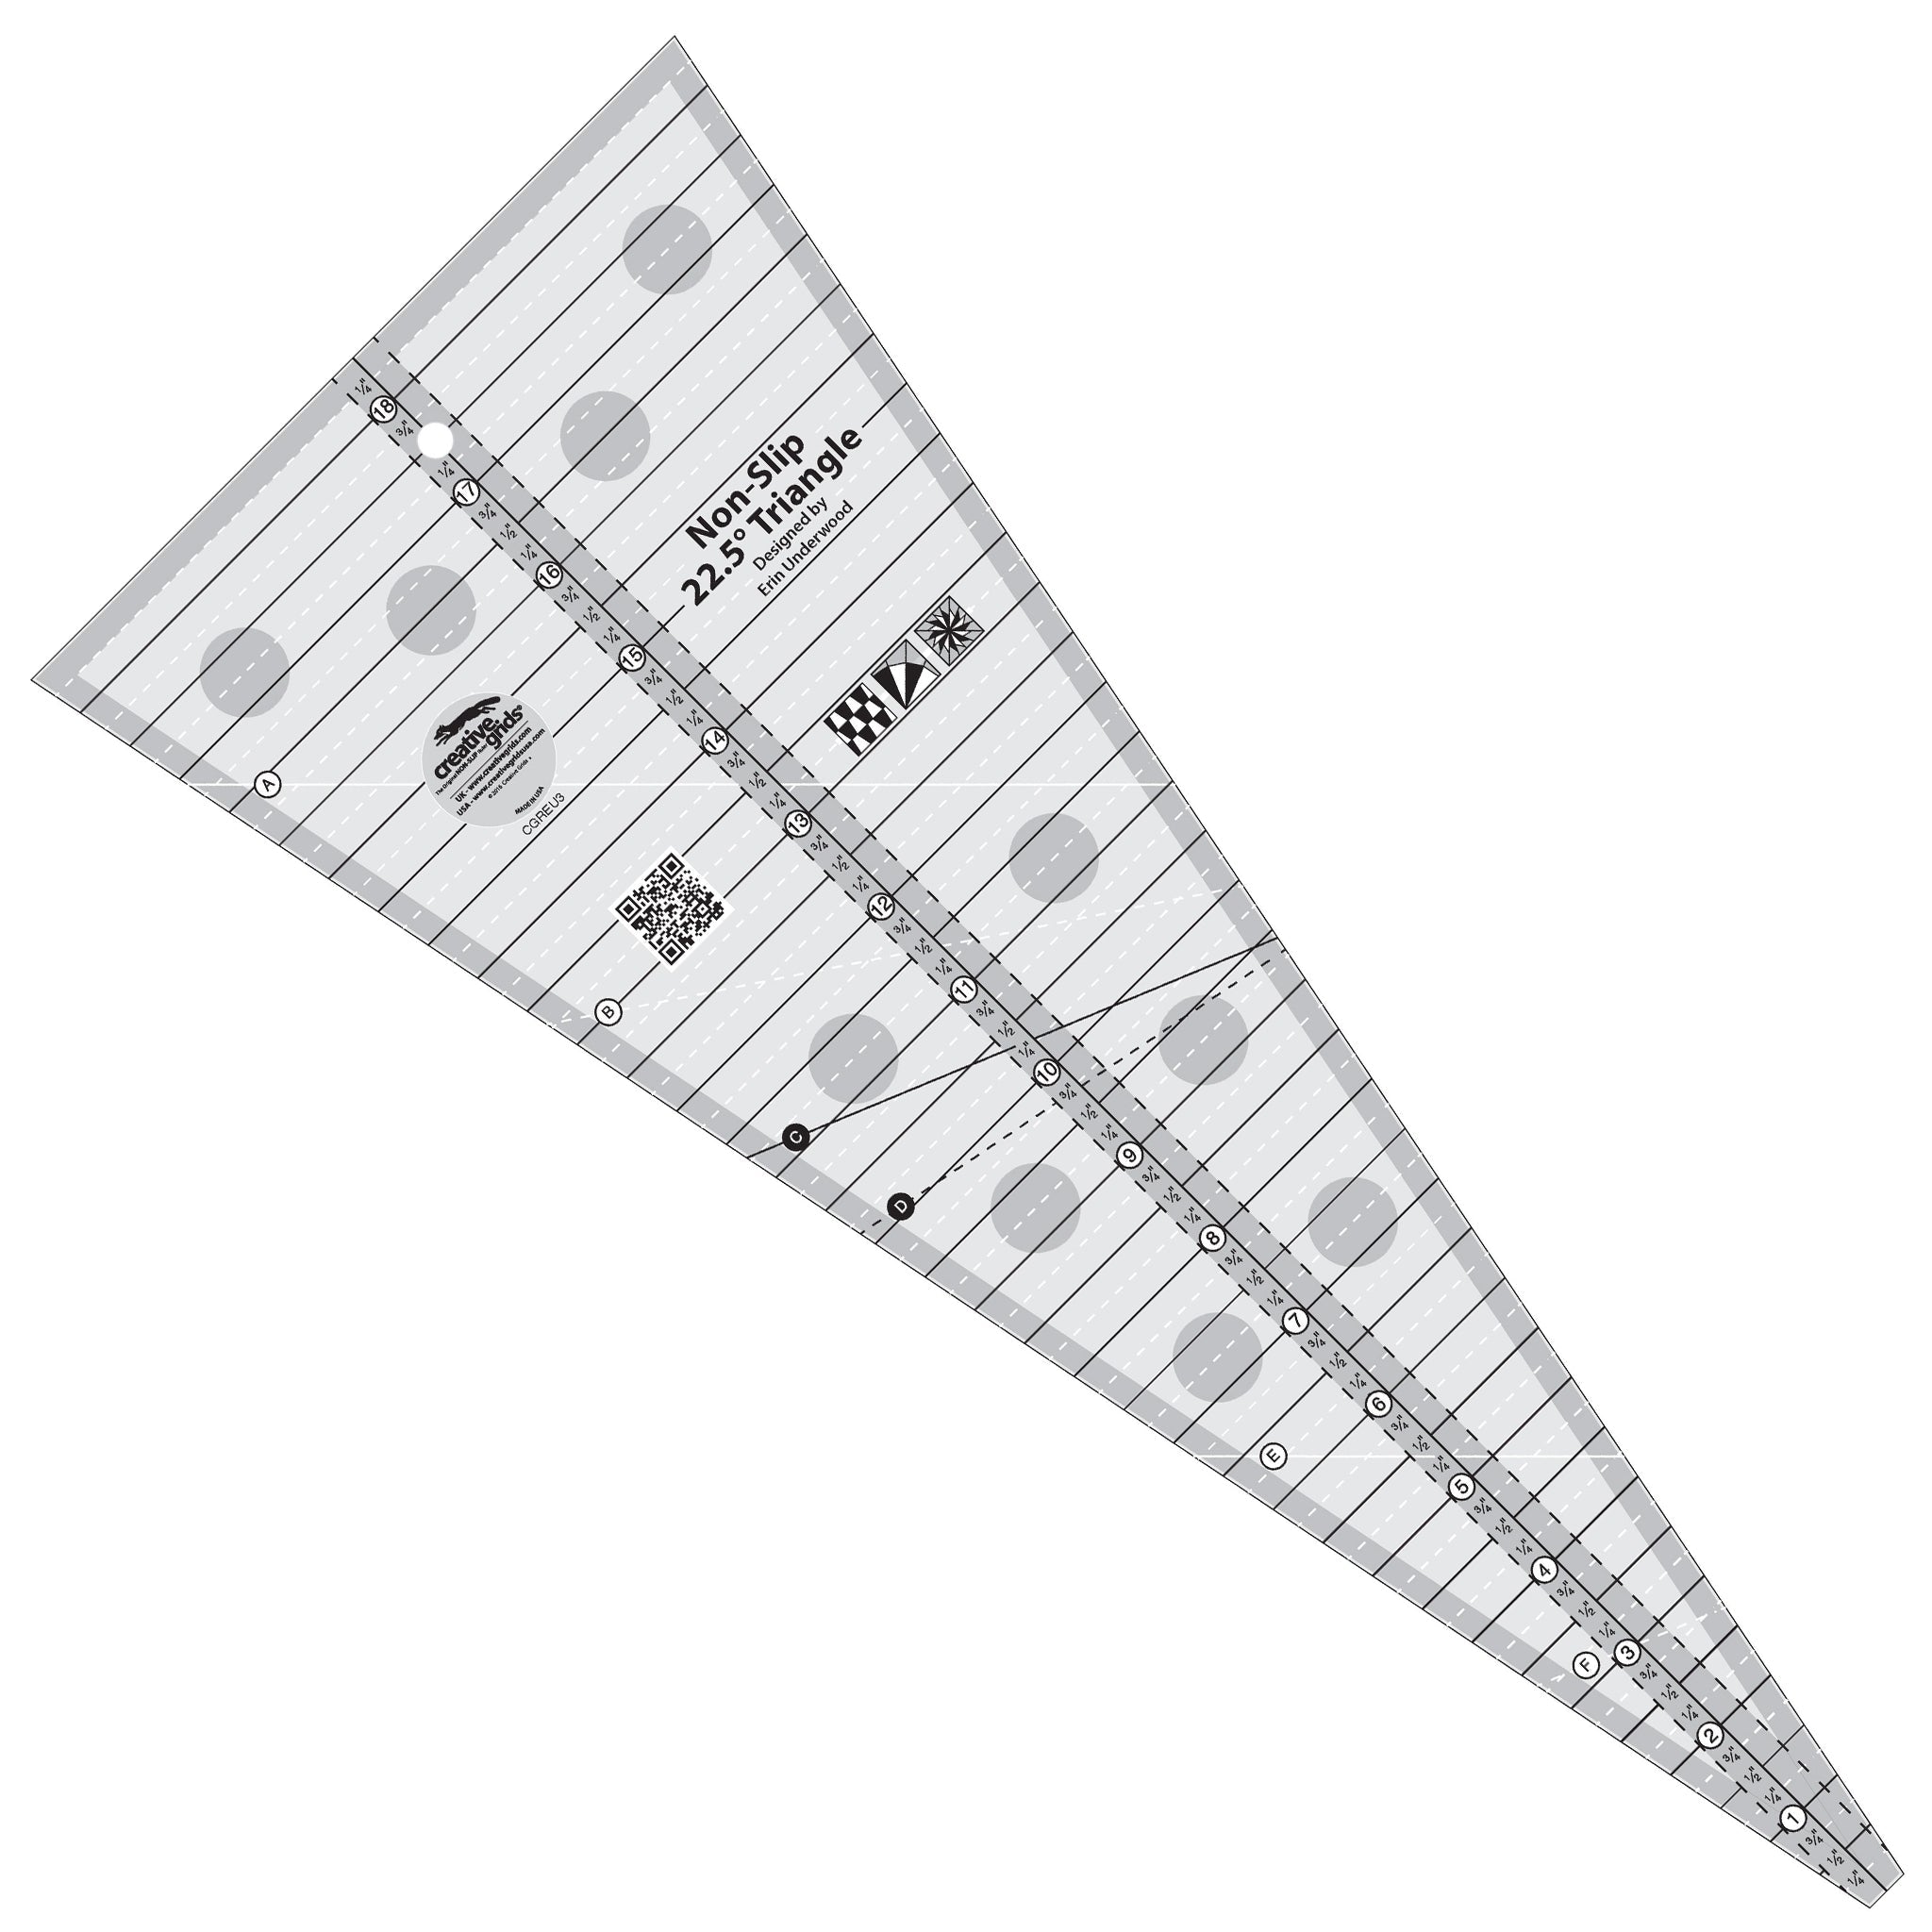 Creative Grids Simple 7/8 Triangle Maker Quilt Ruler